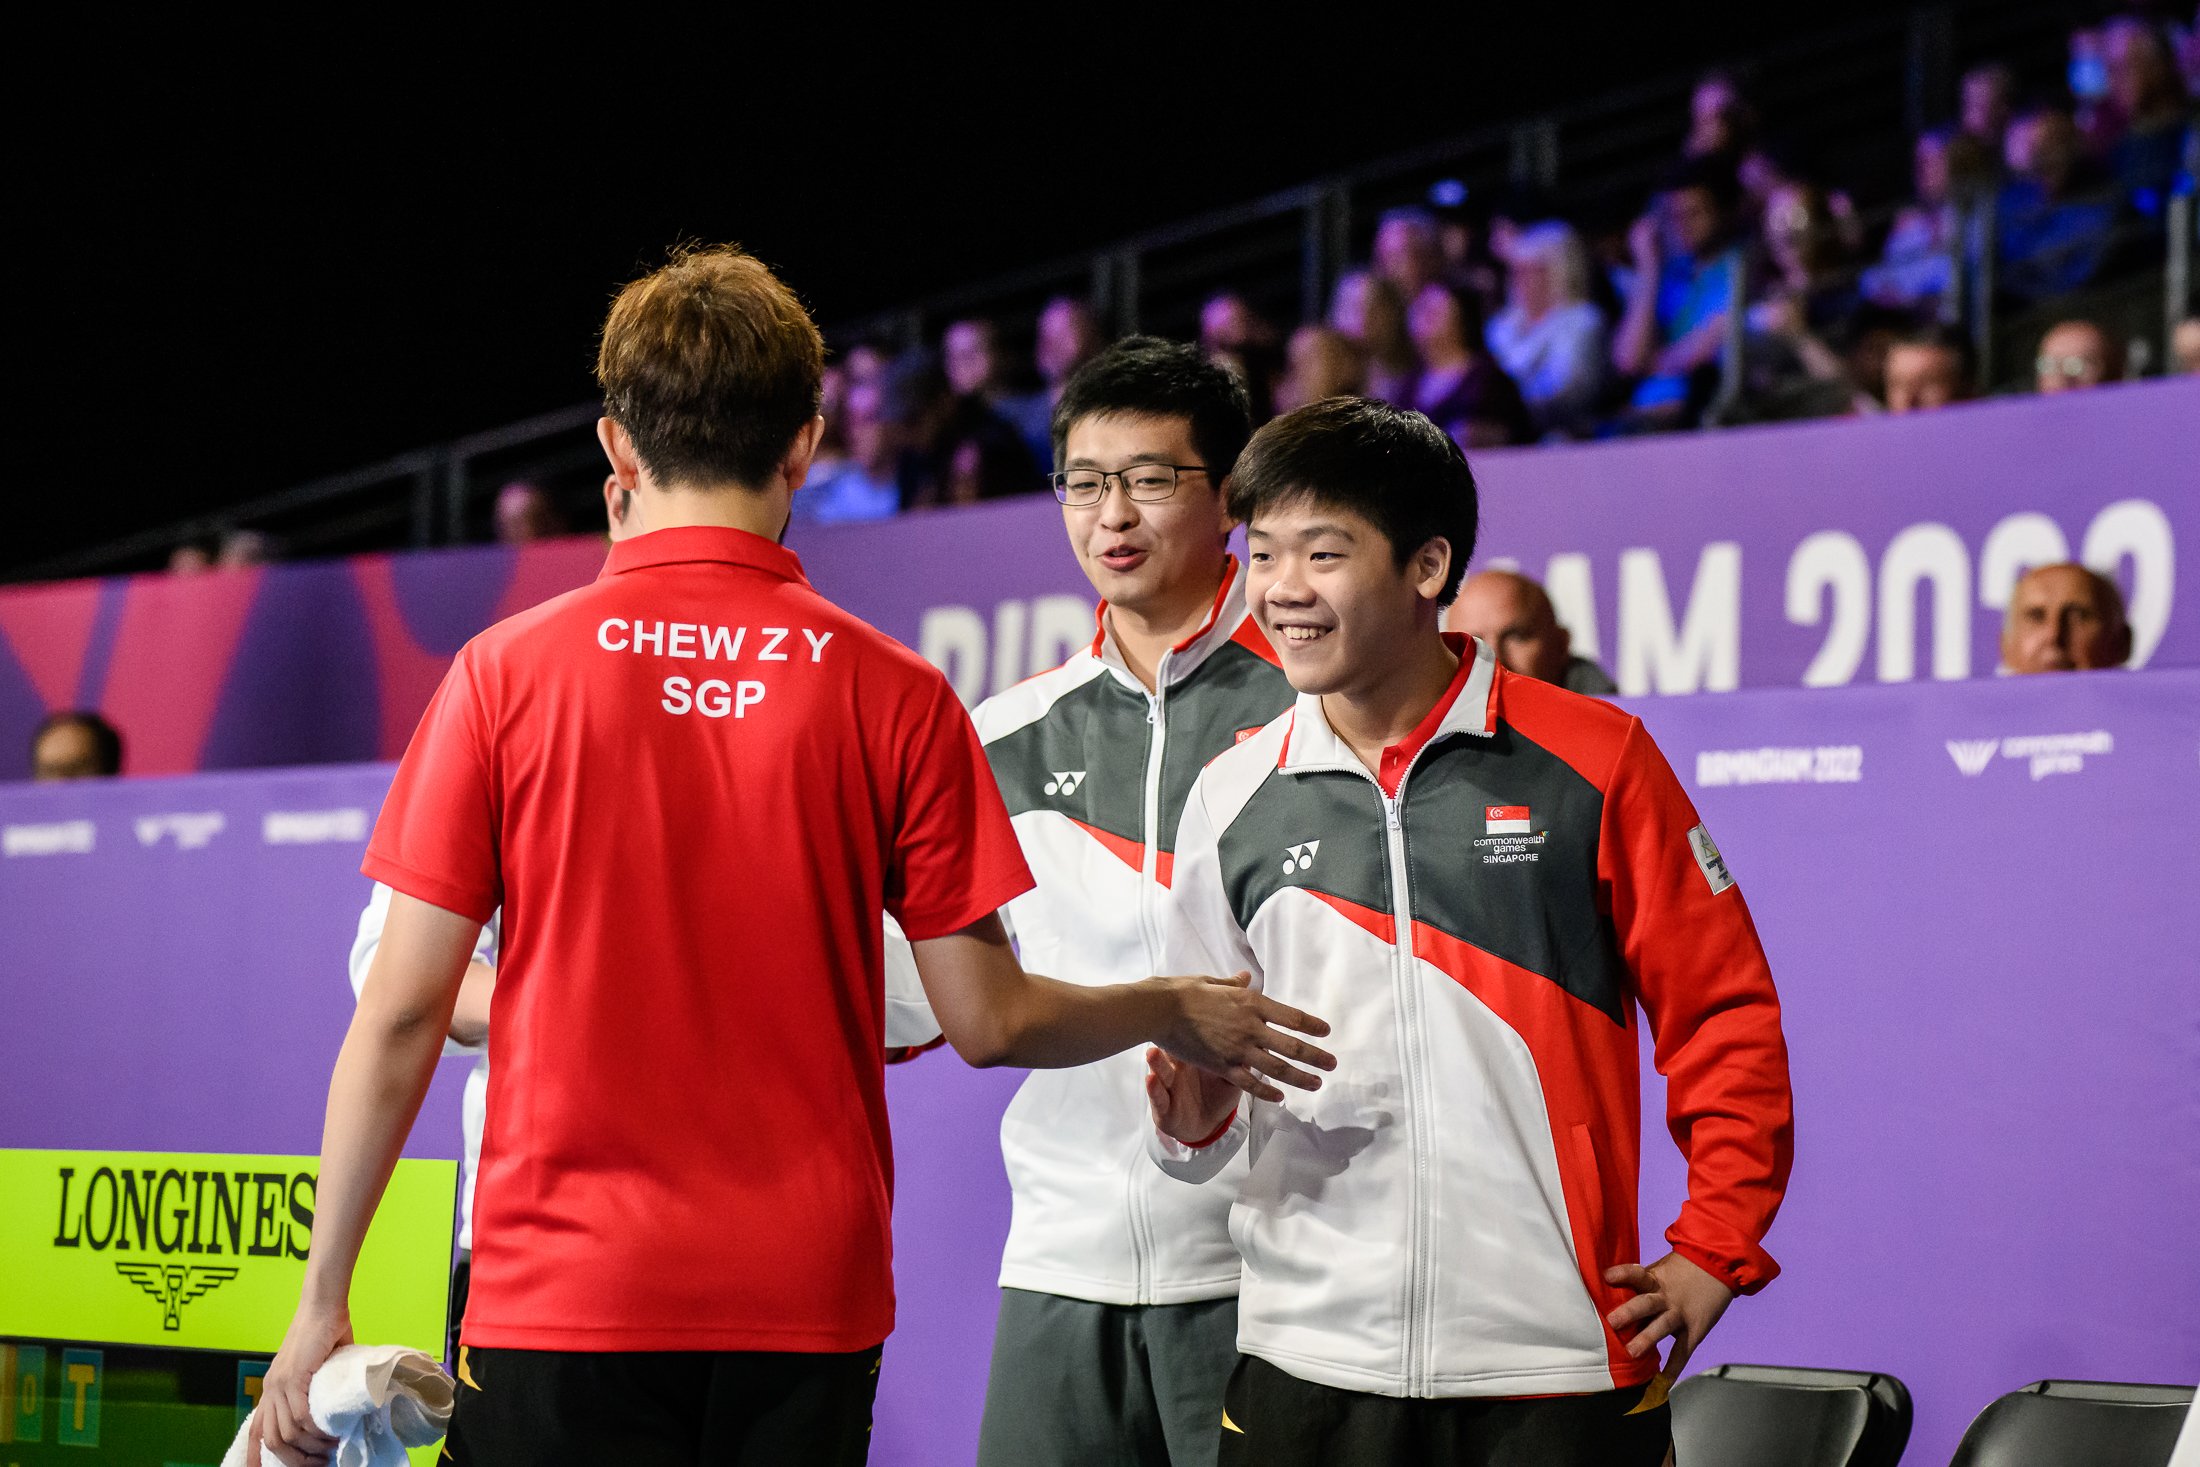 20220731_-_Table Tennis Photo by Andy Chua_015